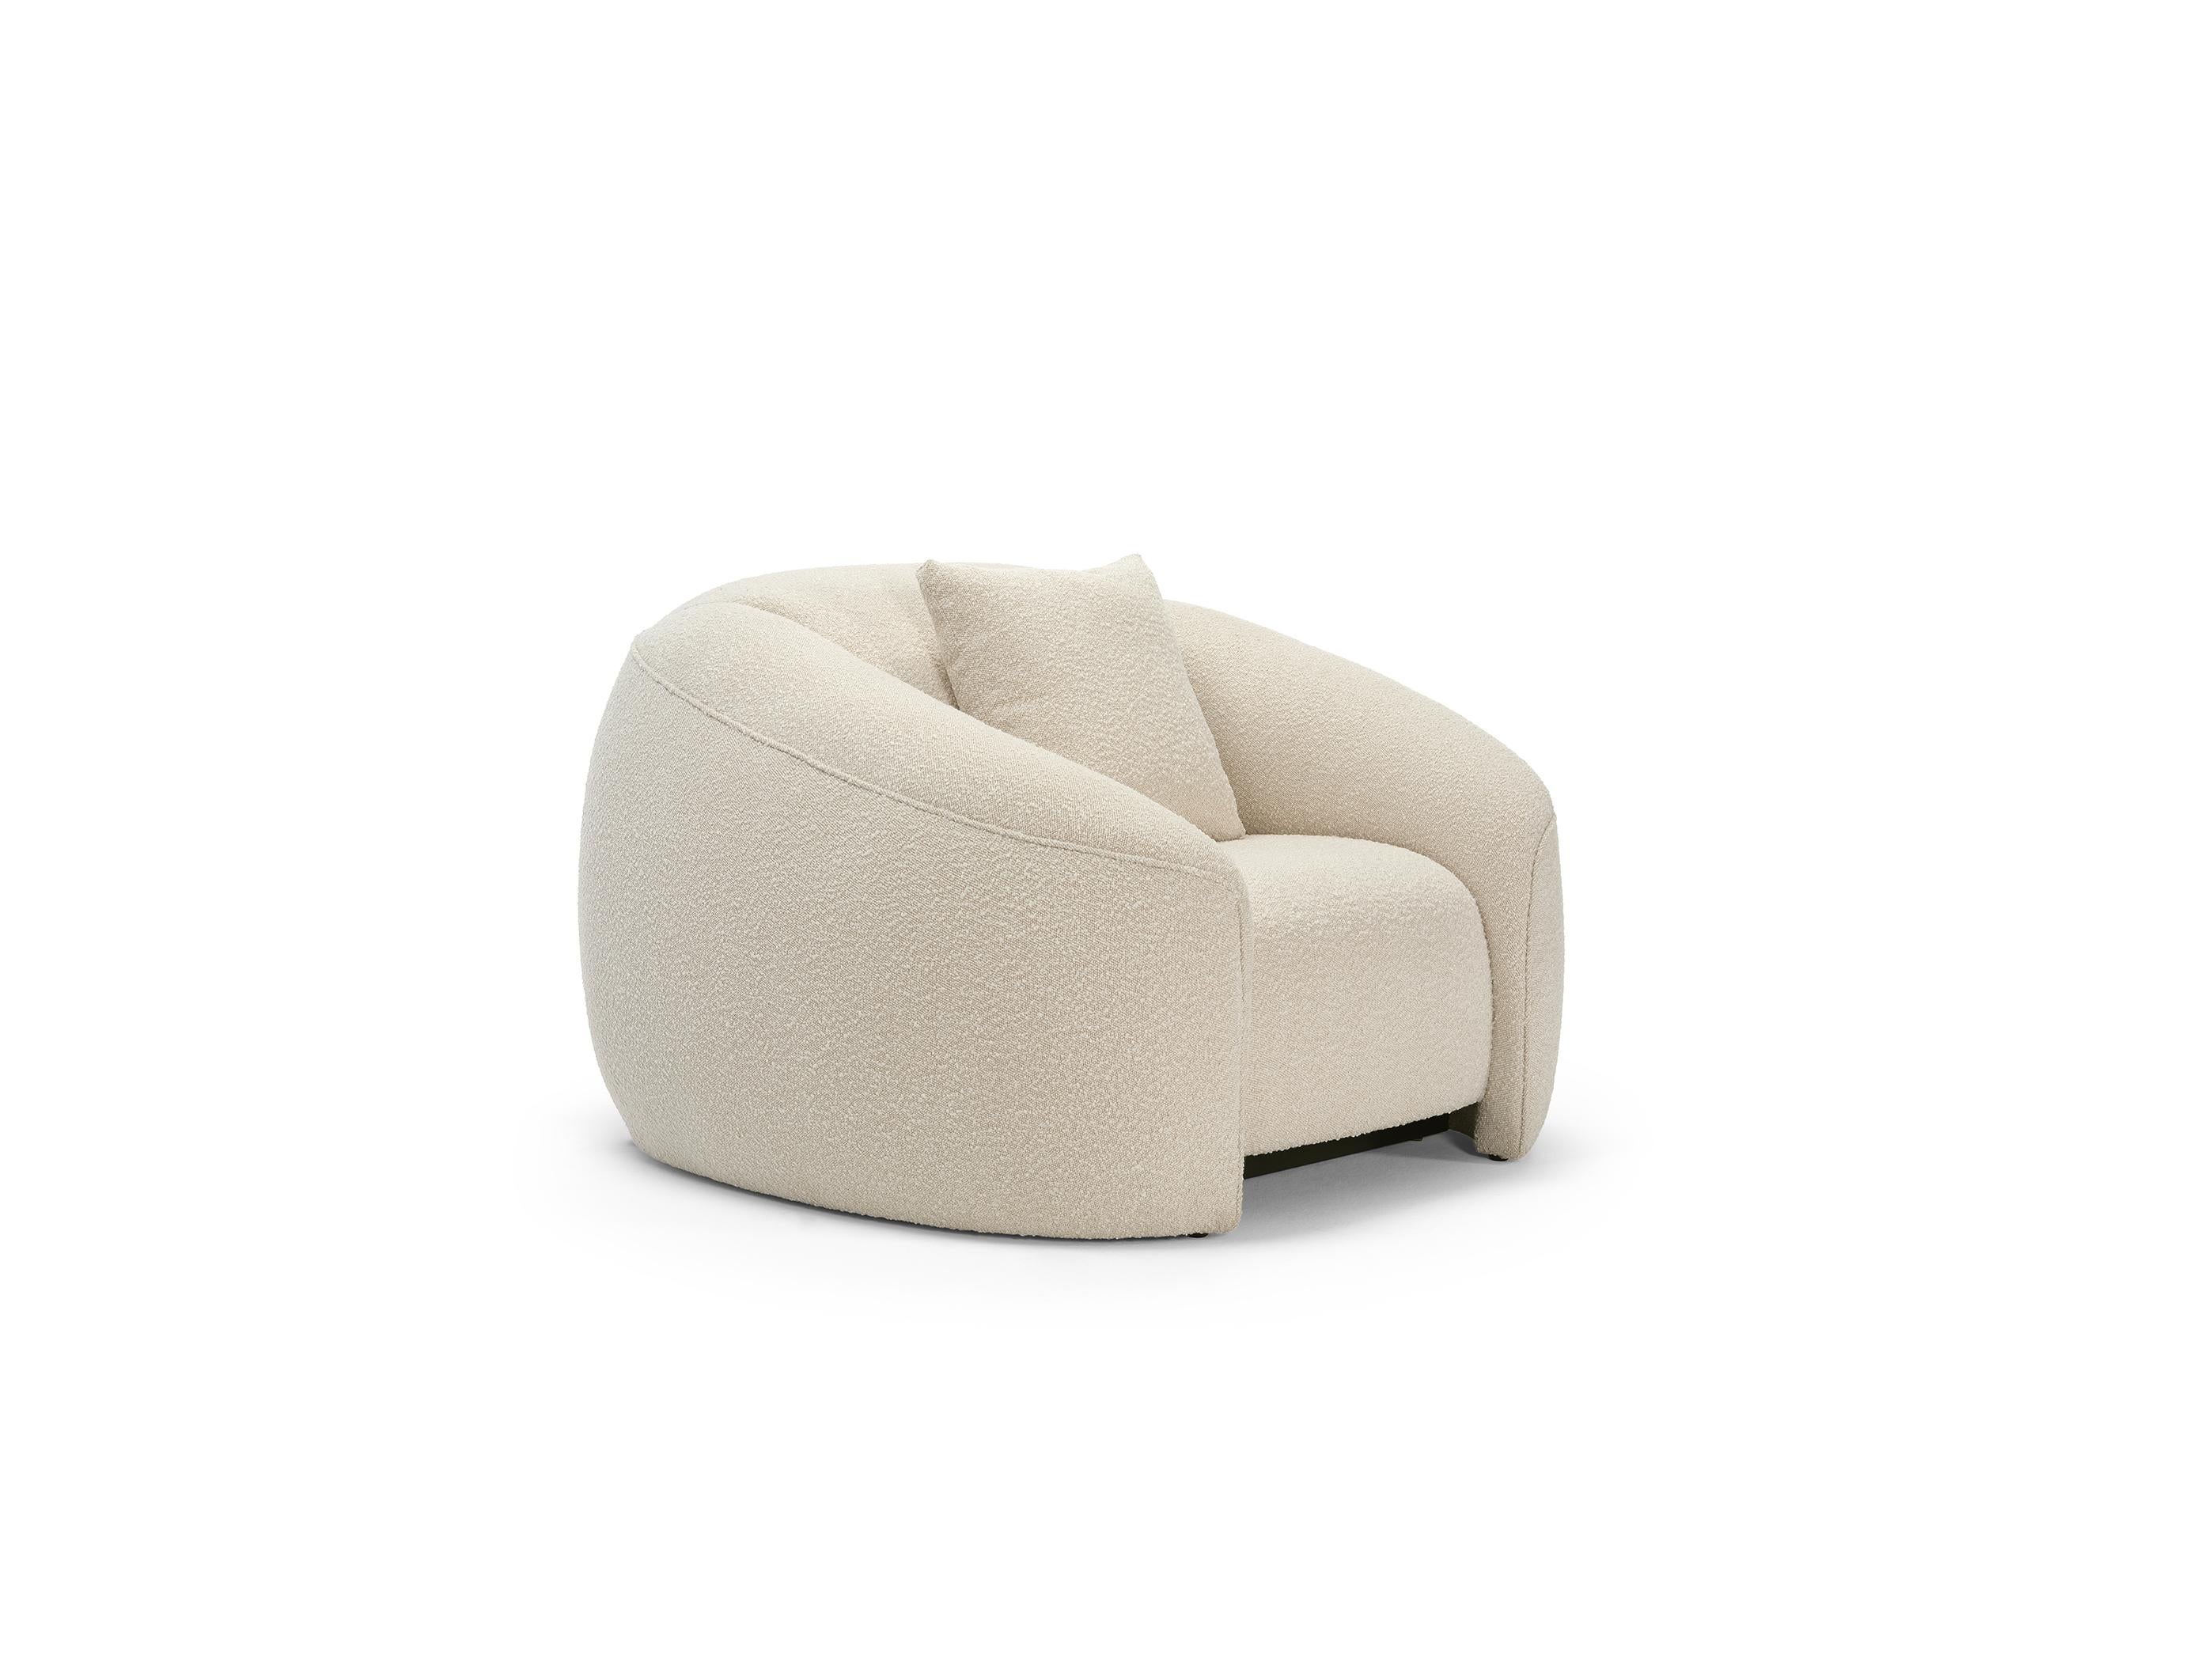 The curved DEAN sofa was designed to provide a superior comfort feeling. The enveloping structure and the balanced combination of feathers and memory foam will embrace you on a moment of trully relaxation. Dean is available to order with a matching